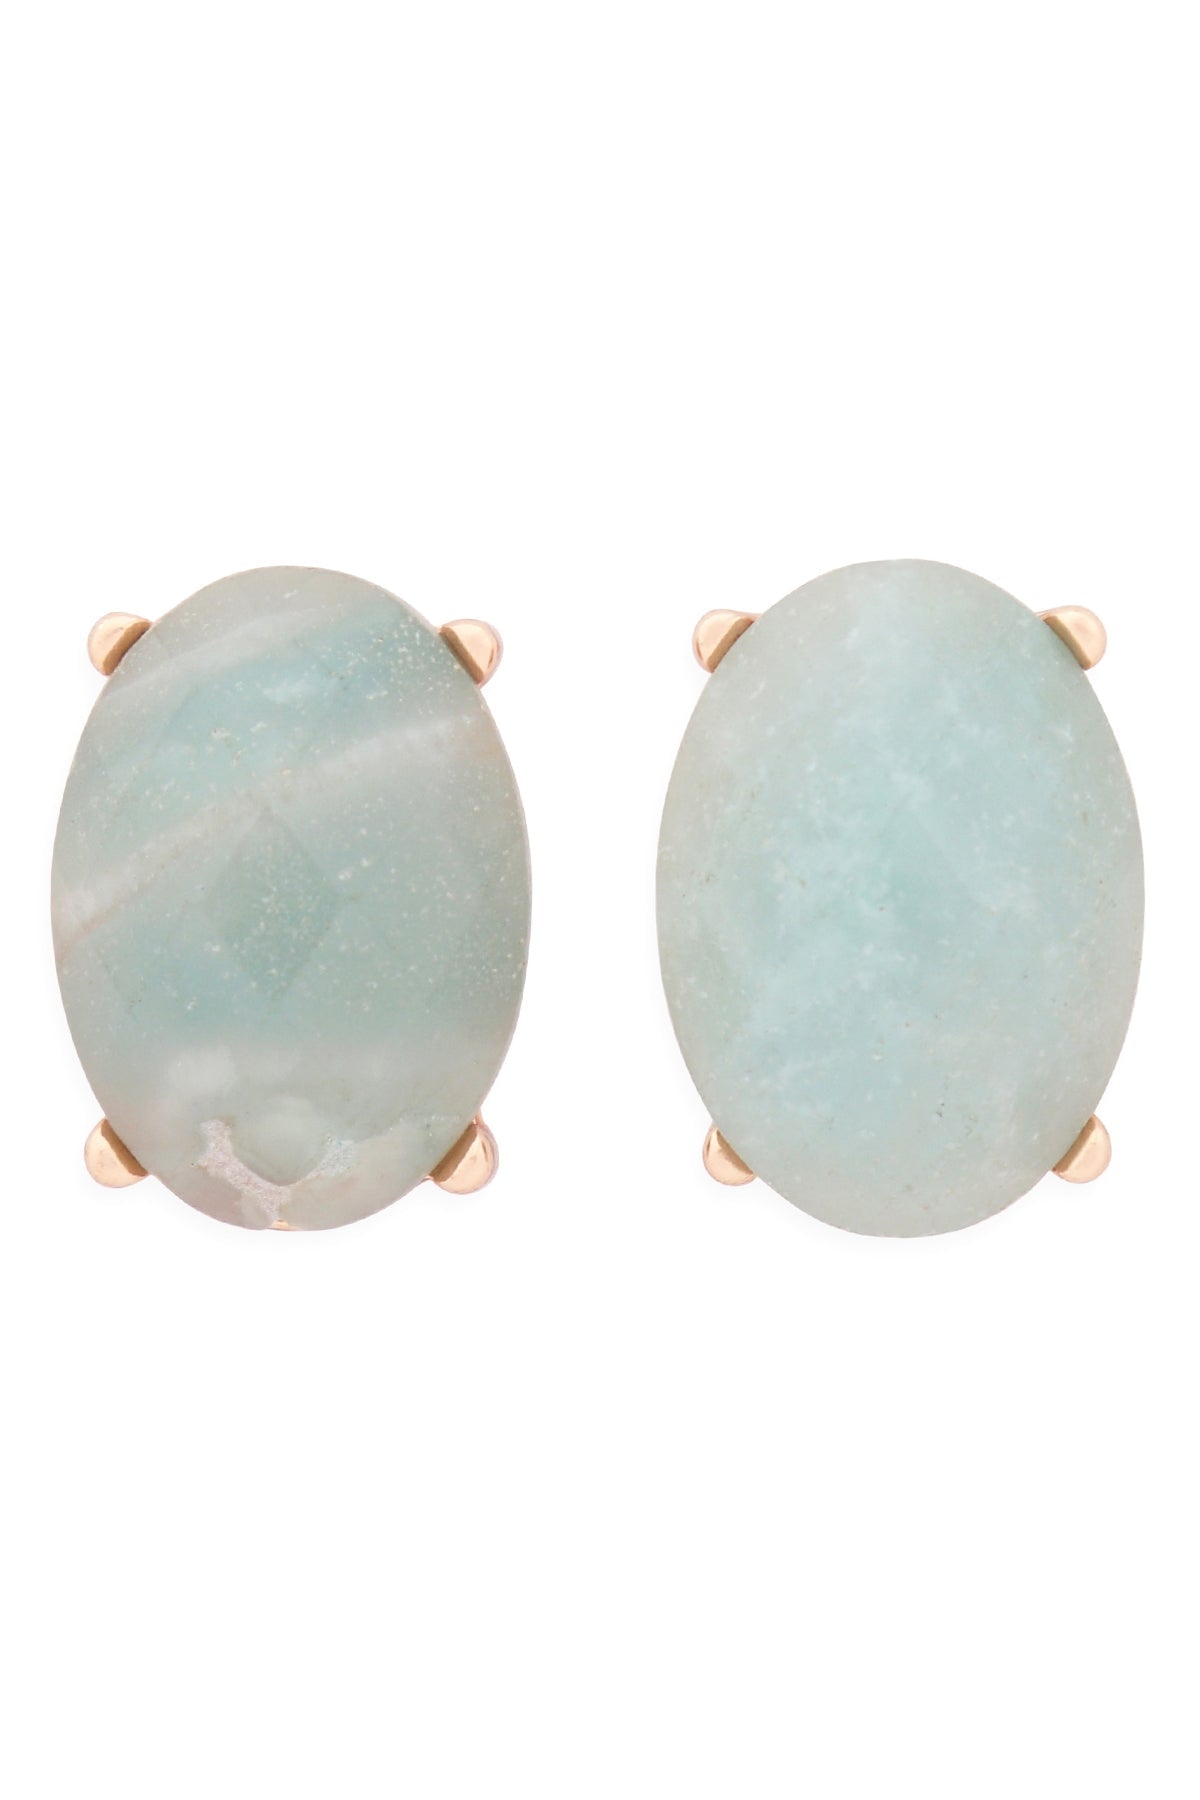 FACETED OVAL STONE POST EARRINGS/6PCS (NOW $1.00 ONLY!)